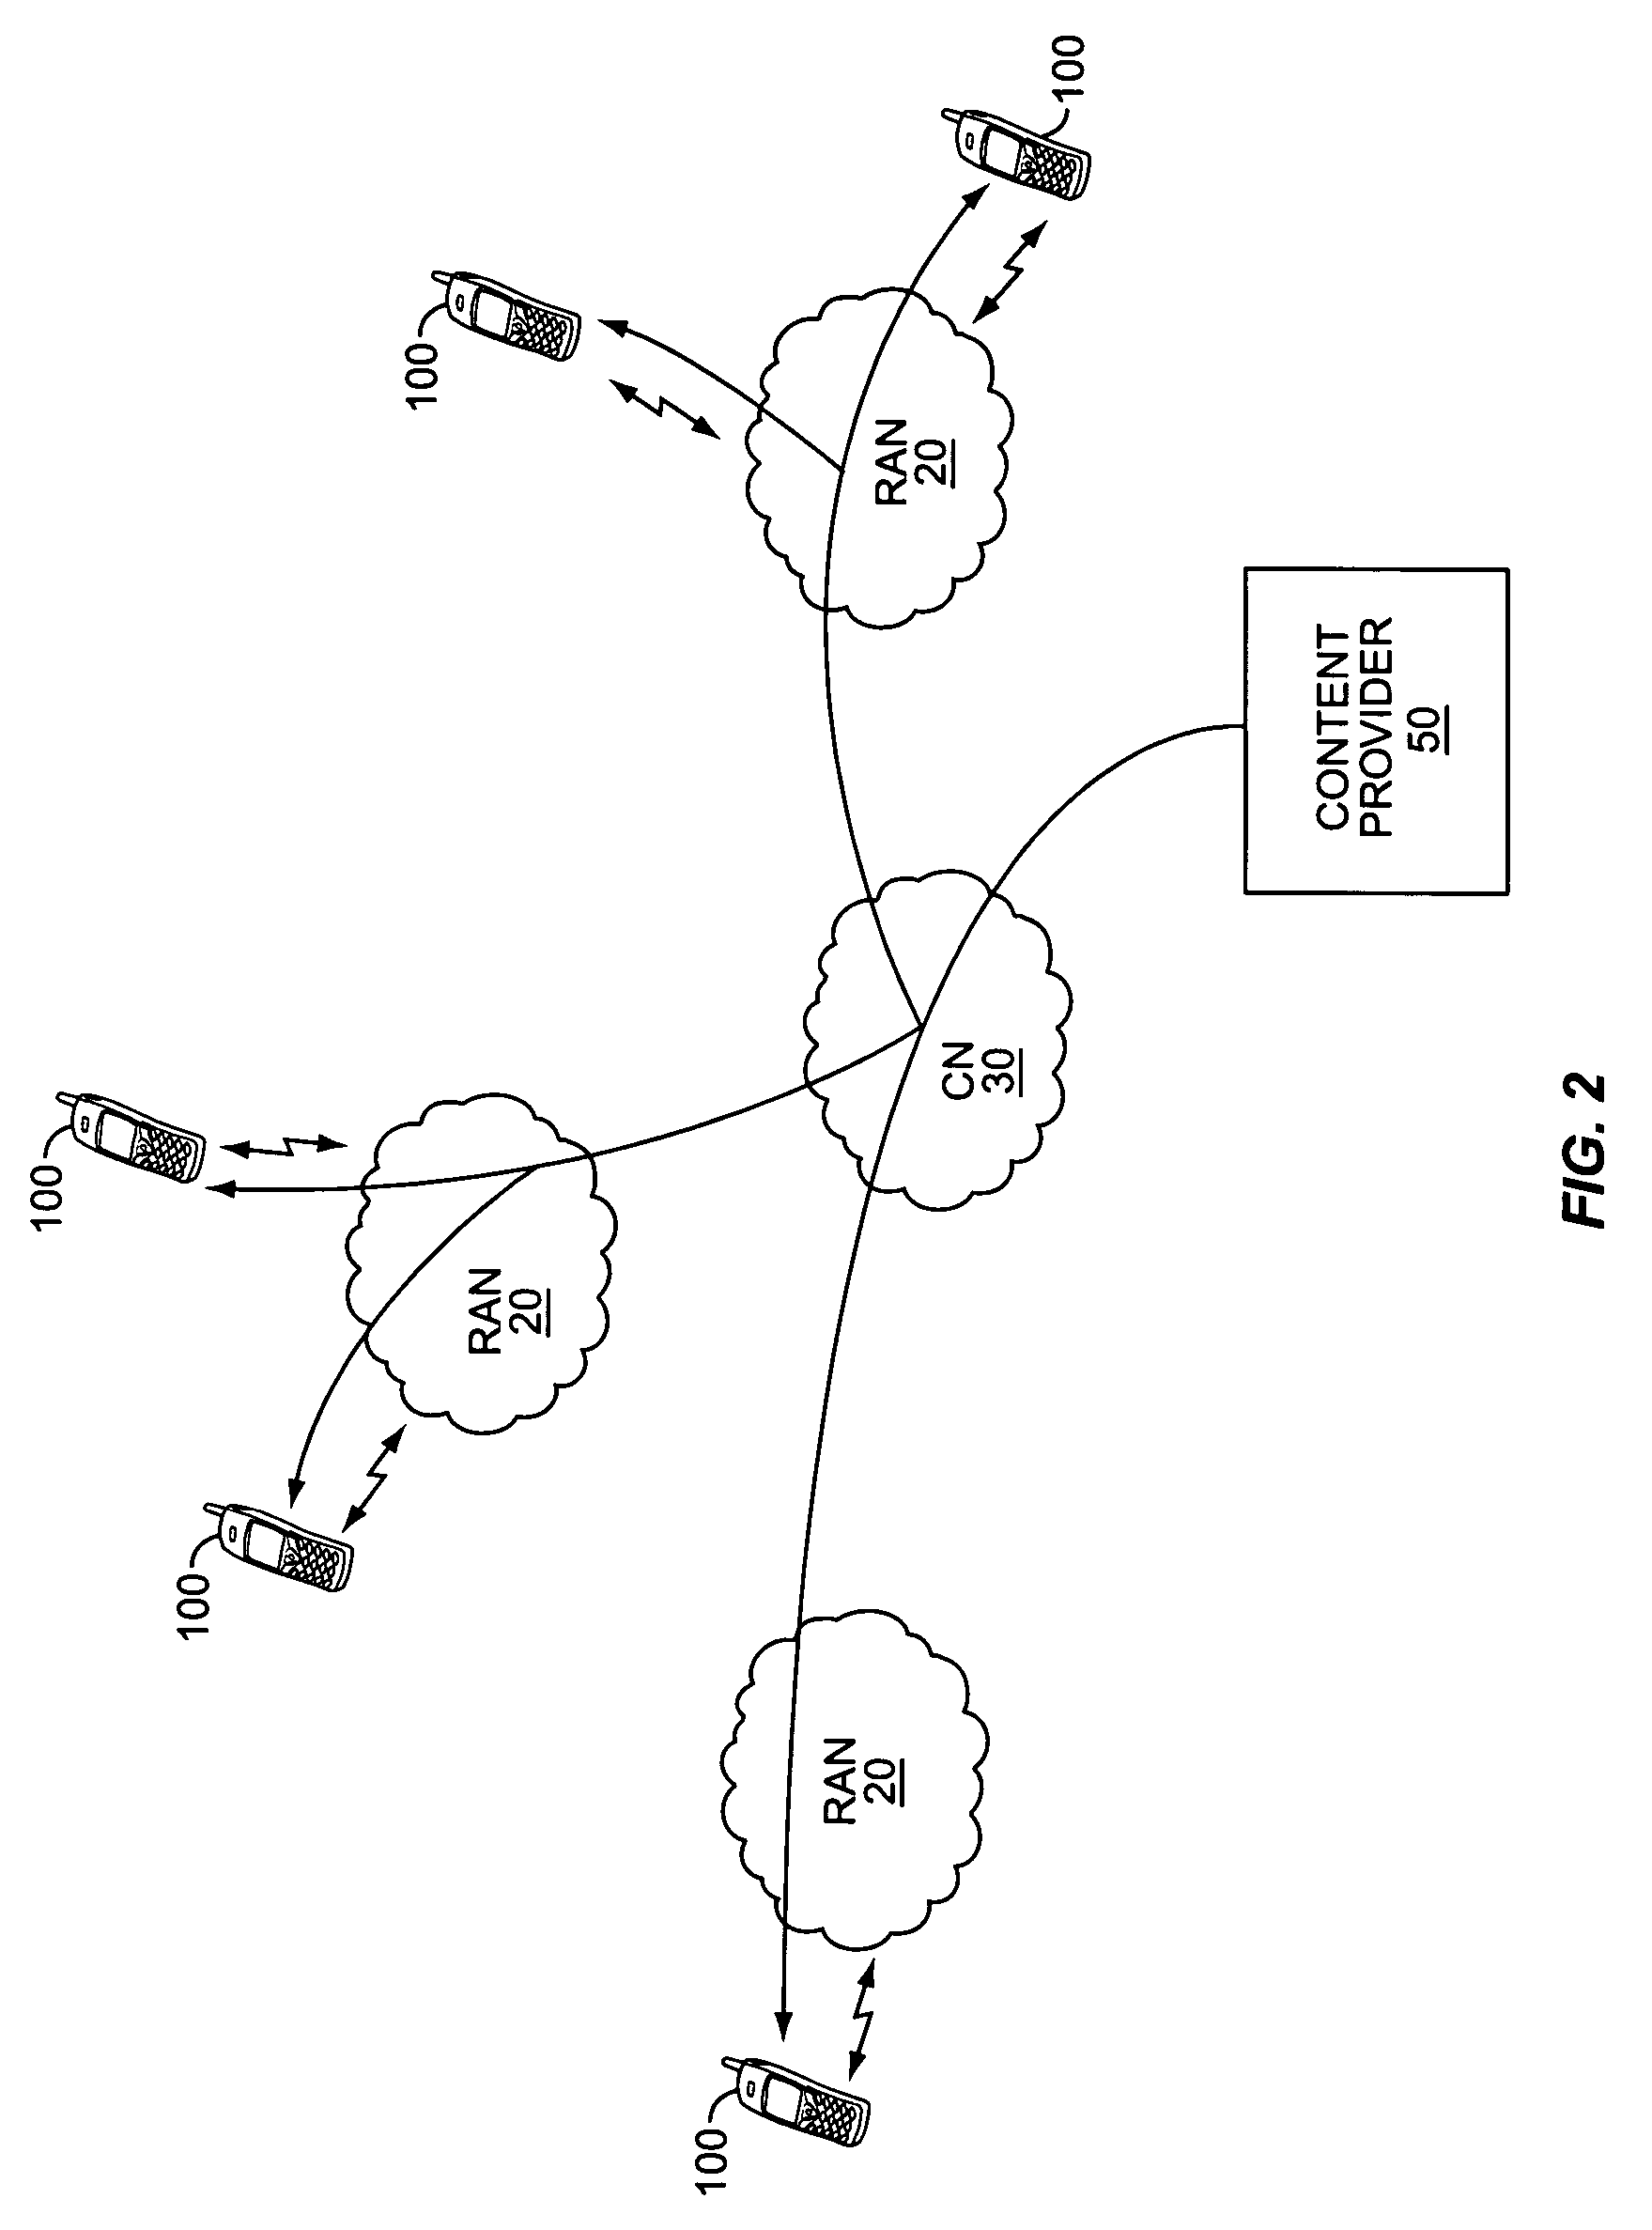 Scalable quality broadcast service in a mobile wireless communication network